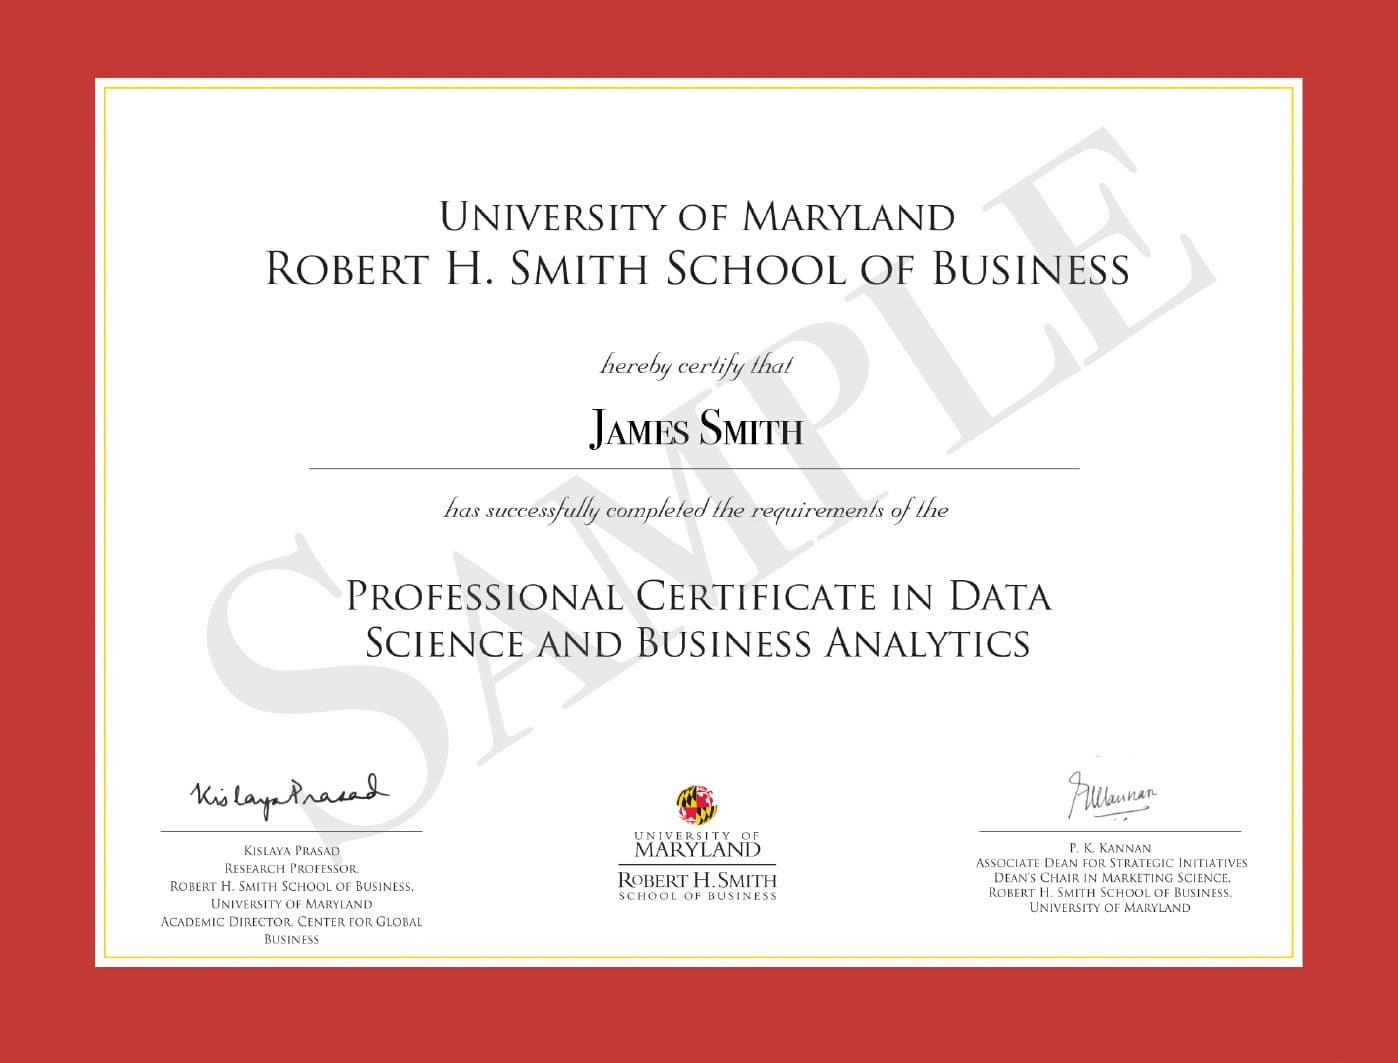 Upon successful completion of the Course, you receive a verified certificate from University of Maryland's Robert H. Smith School of Business